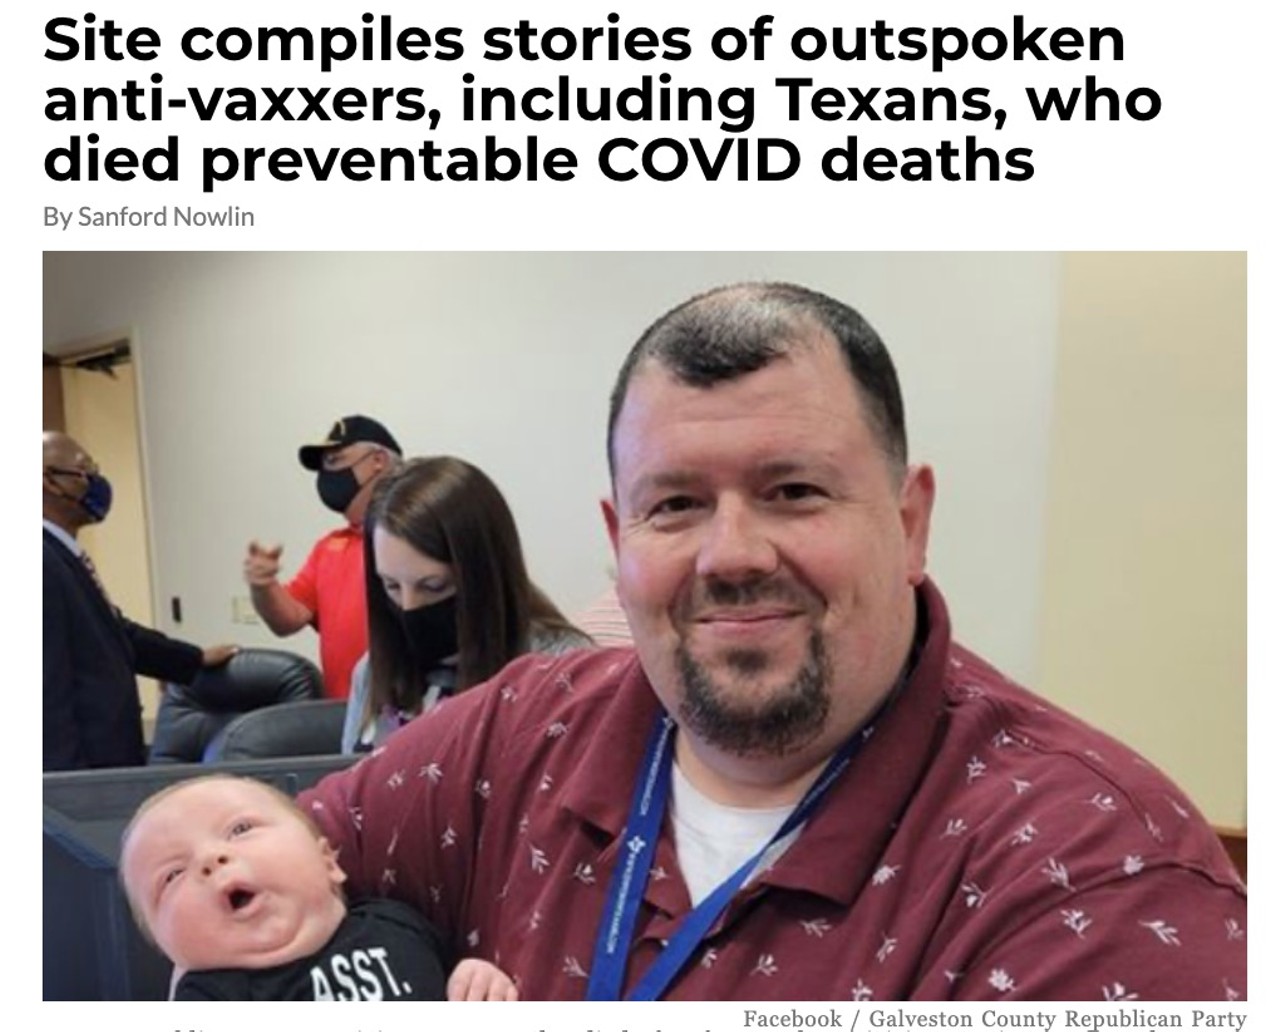 Site compiles stories of outspoken anti-vaxxers, including Texans, who died preventable COVID deaths